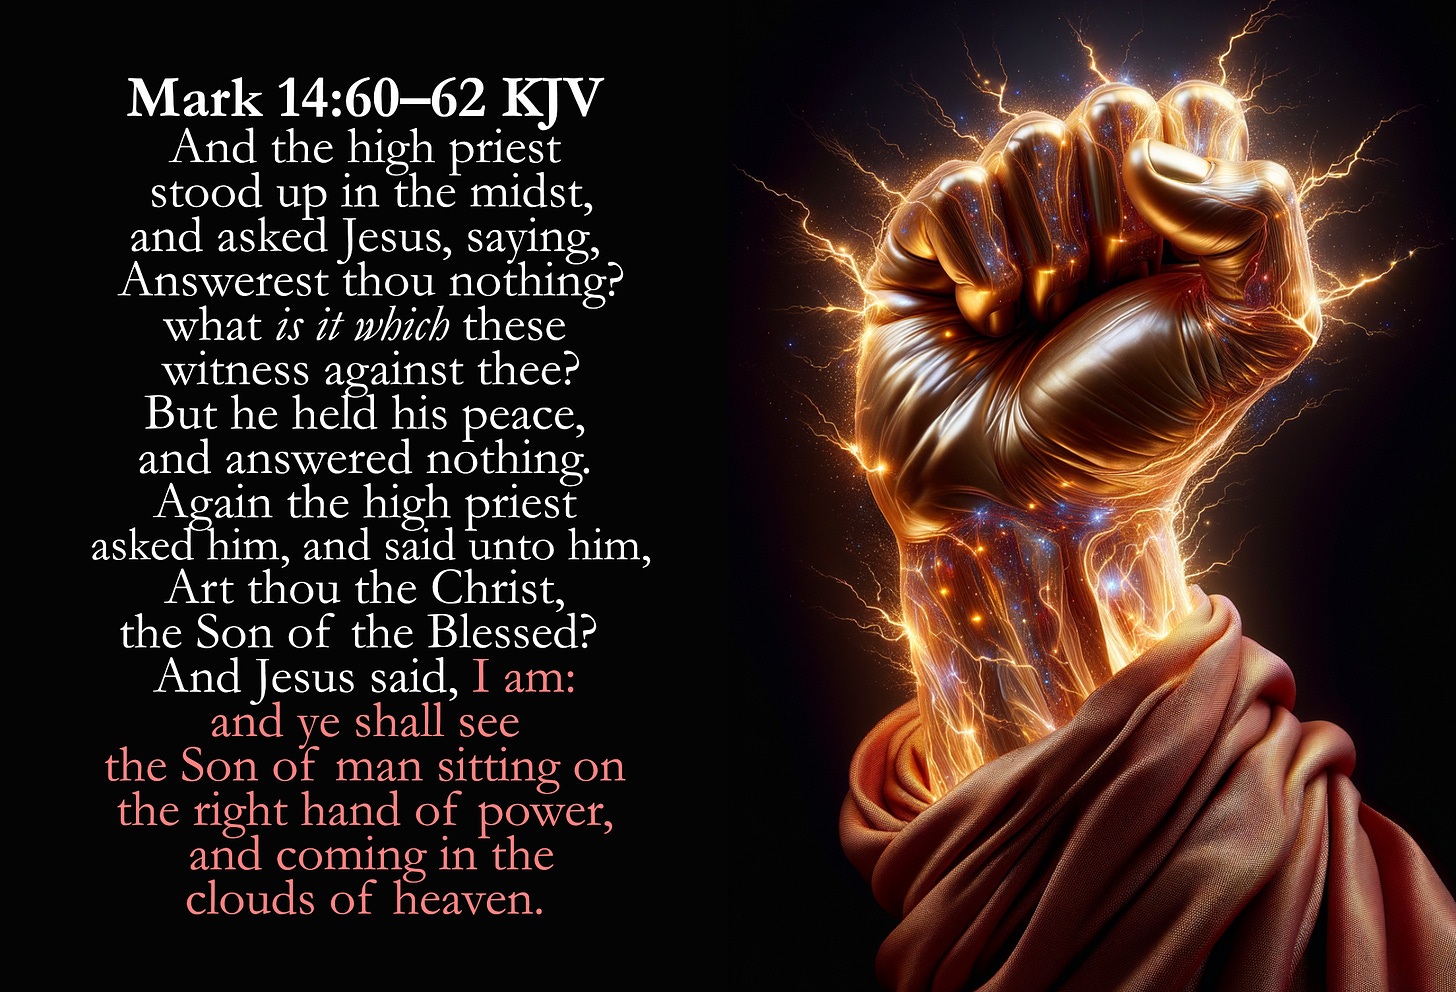 The image displays a powerful depiction of a clenched fist surrounded by what appears to be flowing energy or electricity. The fist is rendered with a glowing, metallic texture, emphasizing strength and intensity. To the left of the image, there is a passage from the Bible, Mark 14:60-62 KJV, describing a moment of questioning Jesus, before he admits that he is the Son of God. The overall visual effect is dramatic, suggesting a connection between the text and the symbolic power represented by the fist. Jesus is the Right Hand of God. 